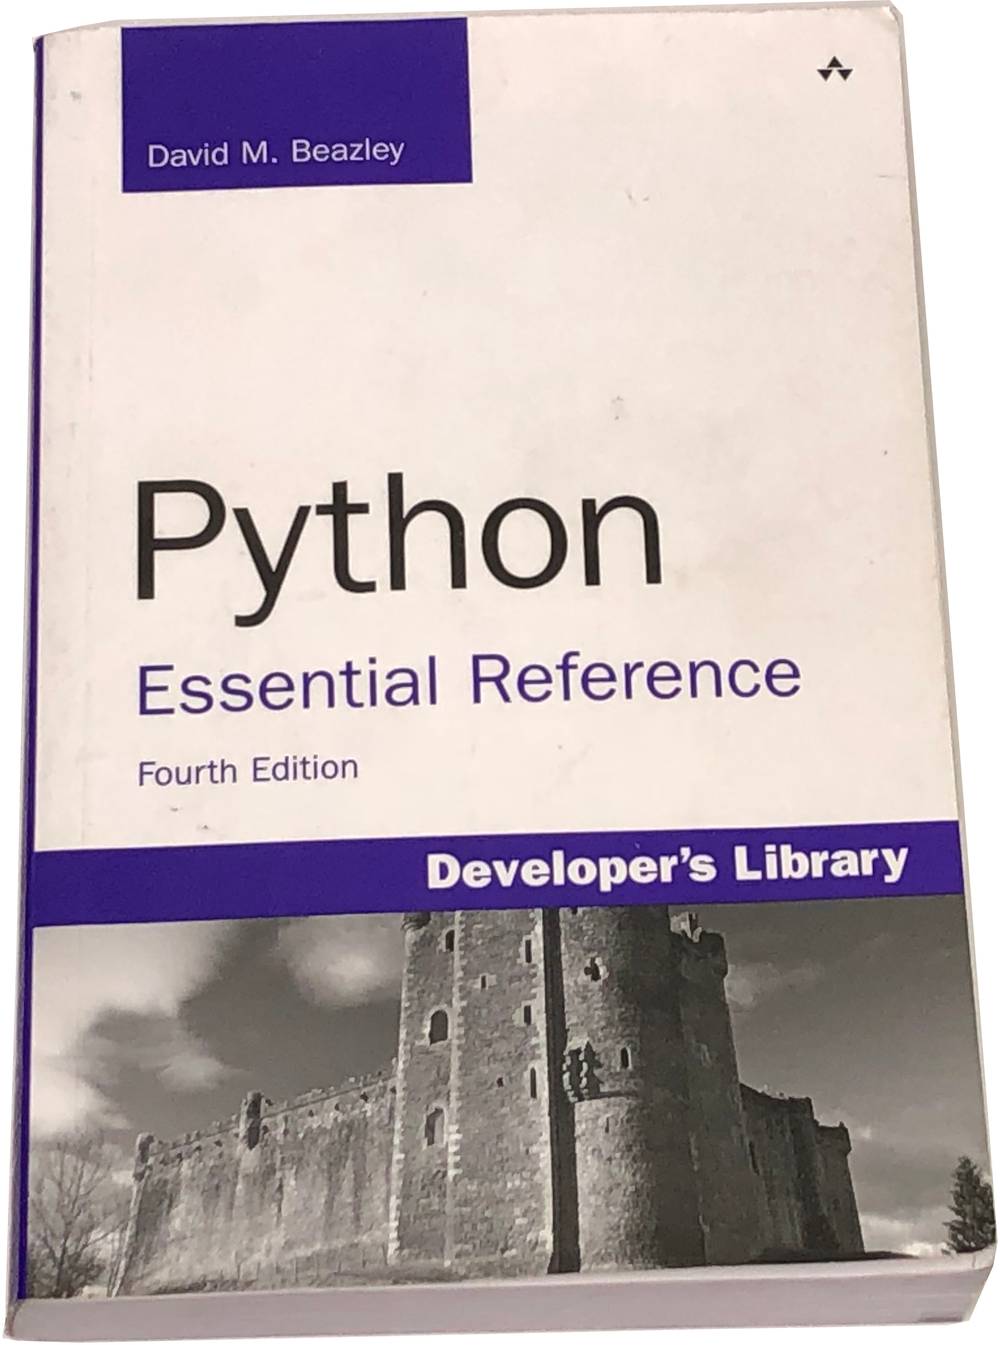 Book image of Python Essential Reference.